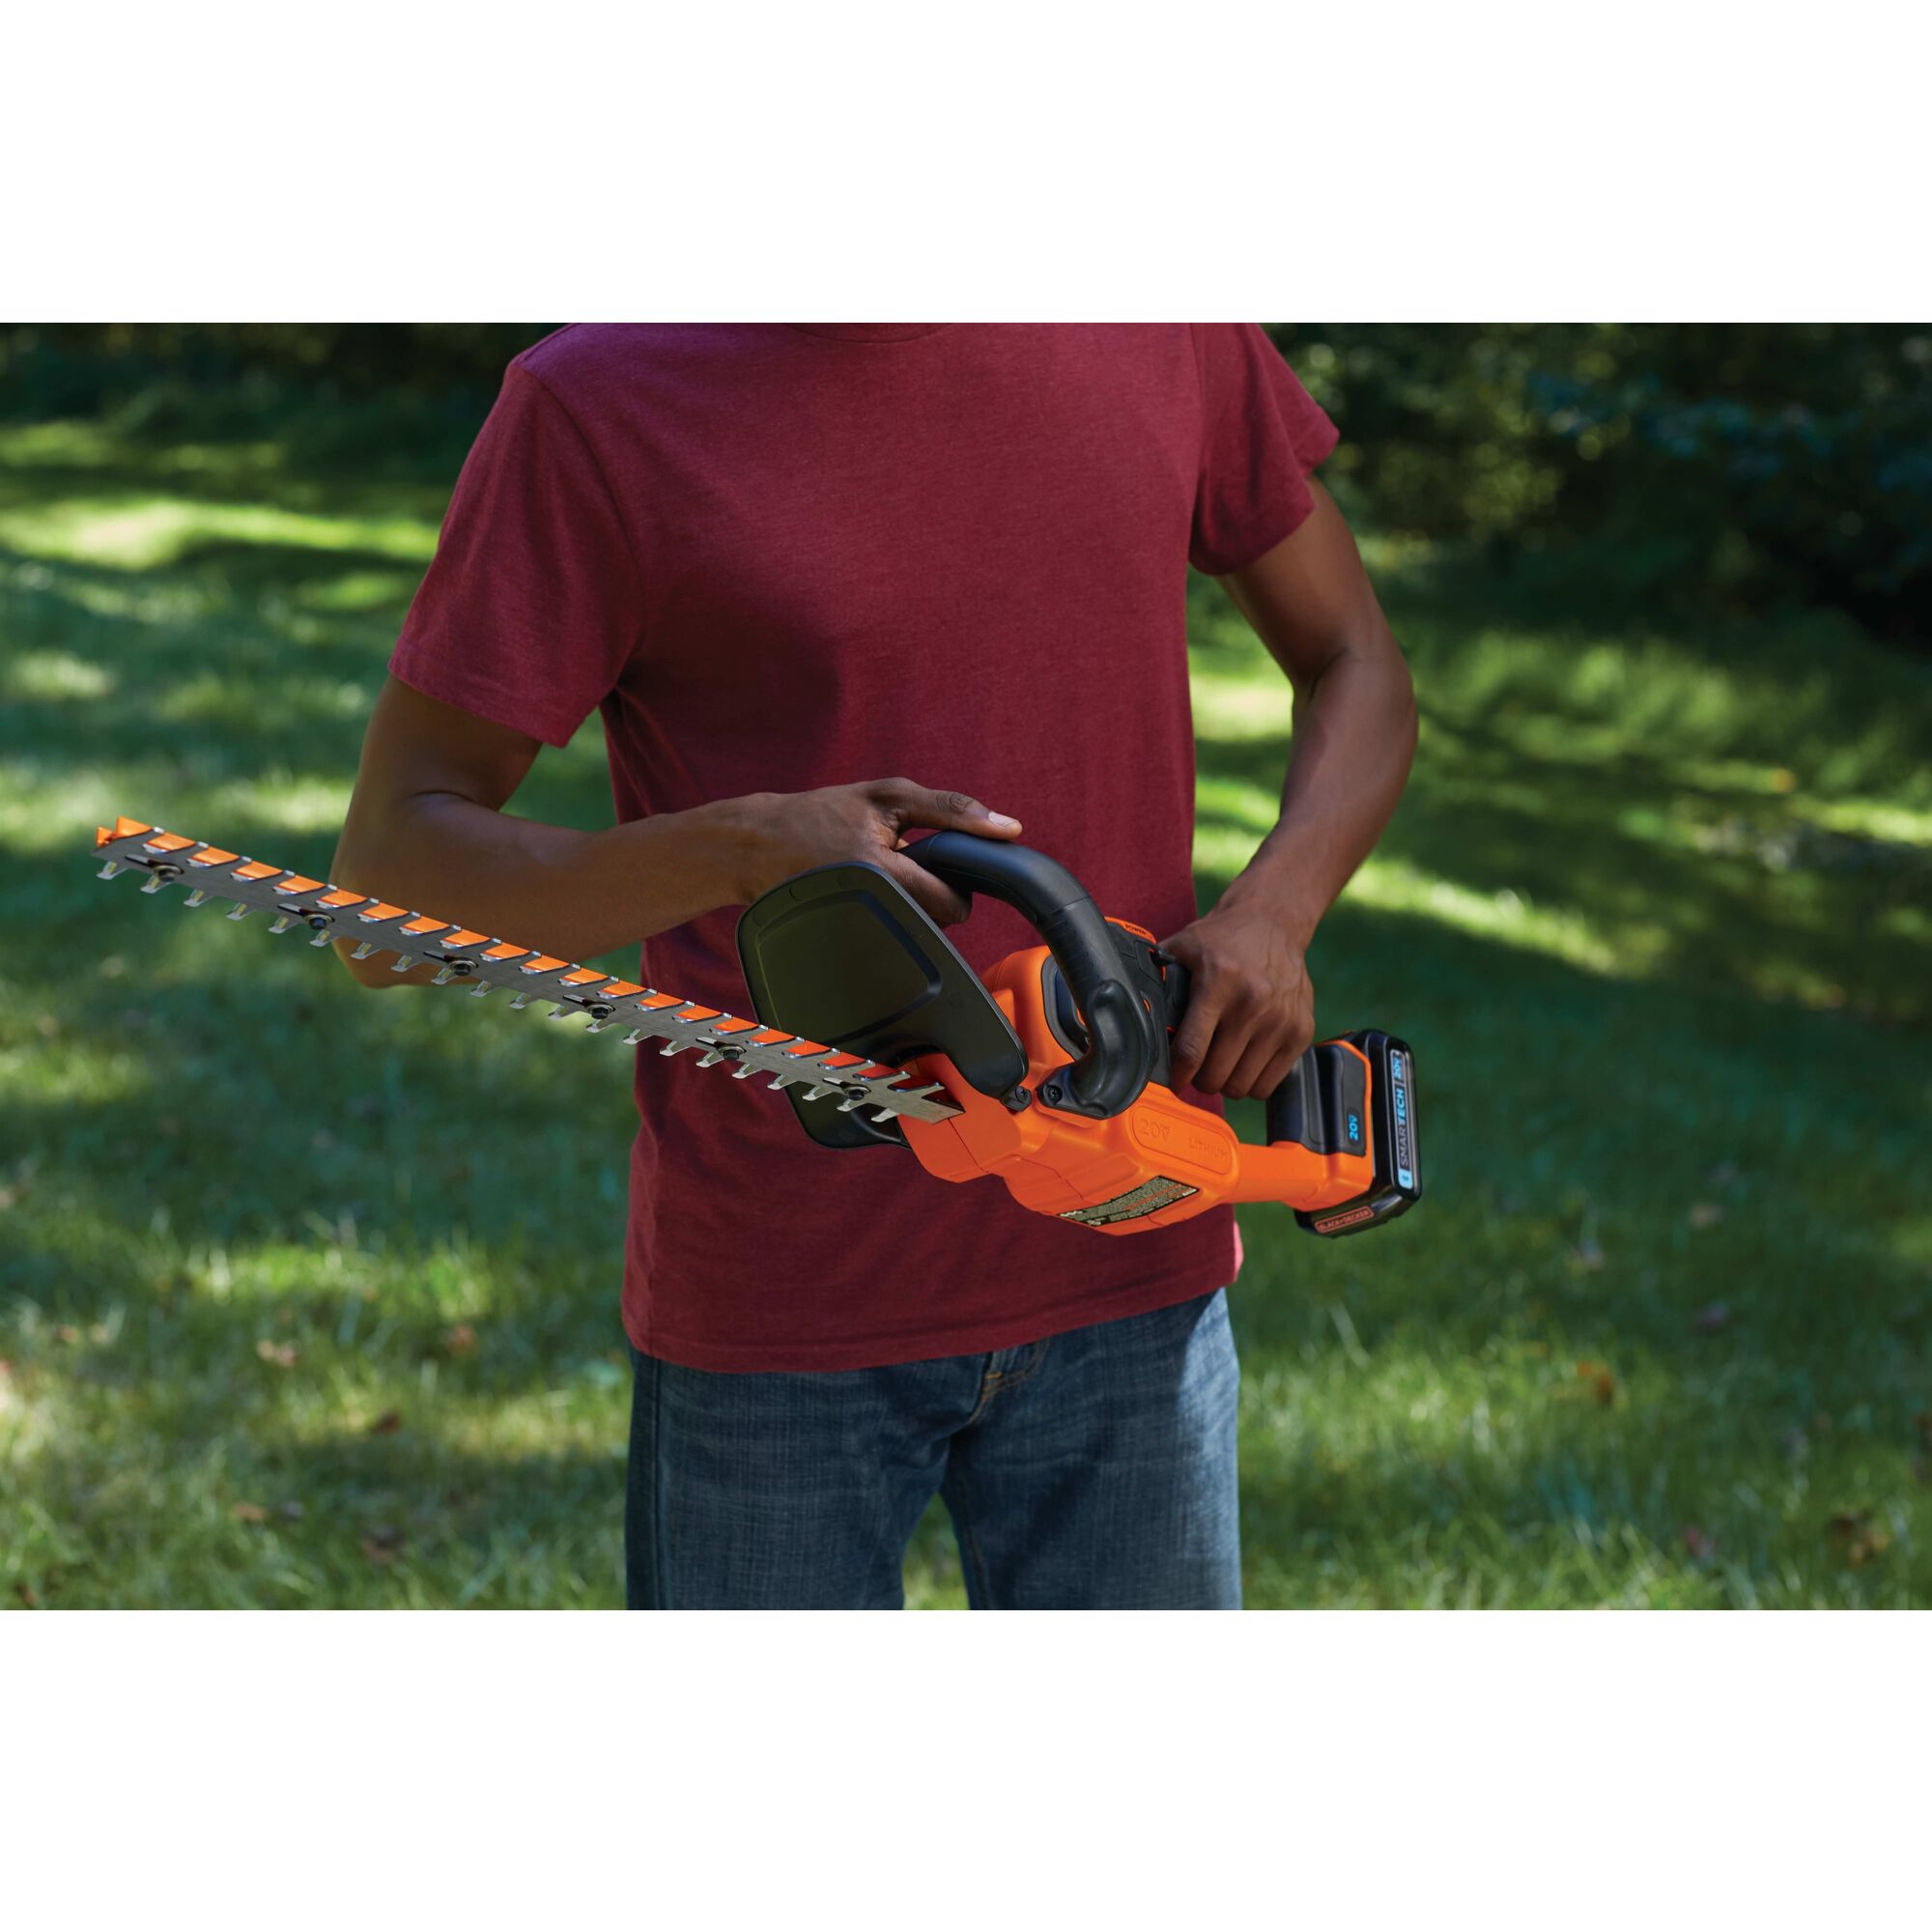 BLACK & DECKER LHT2220 20V MAX Cordless 22 in. Hedge Trimmer (TOOL ONLY)